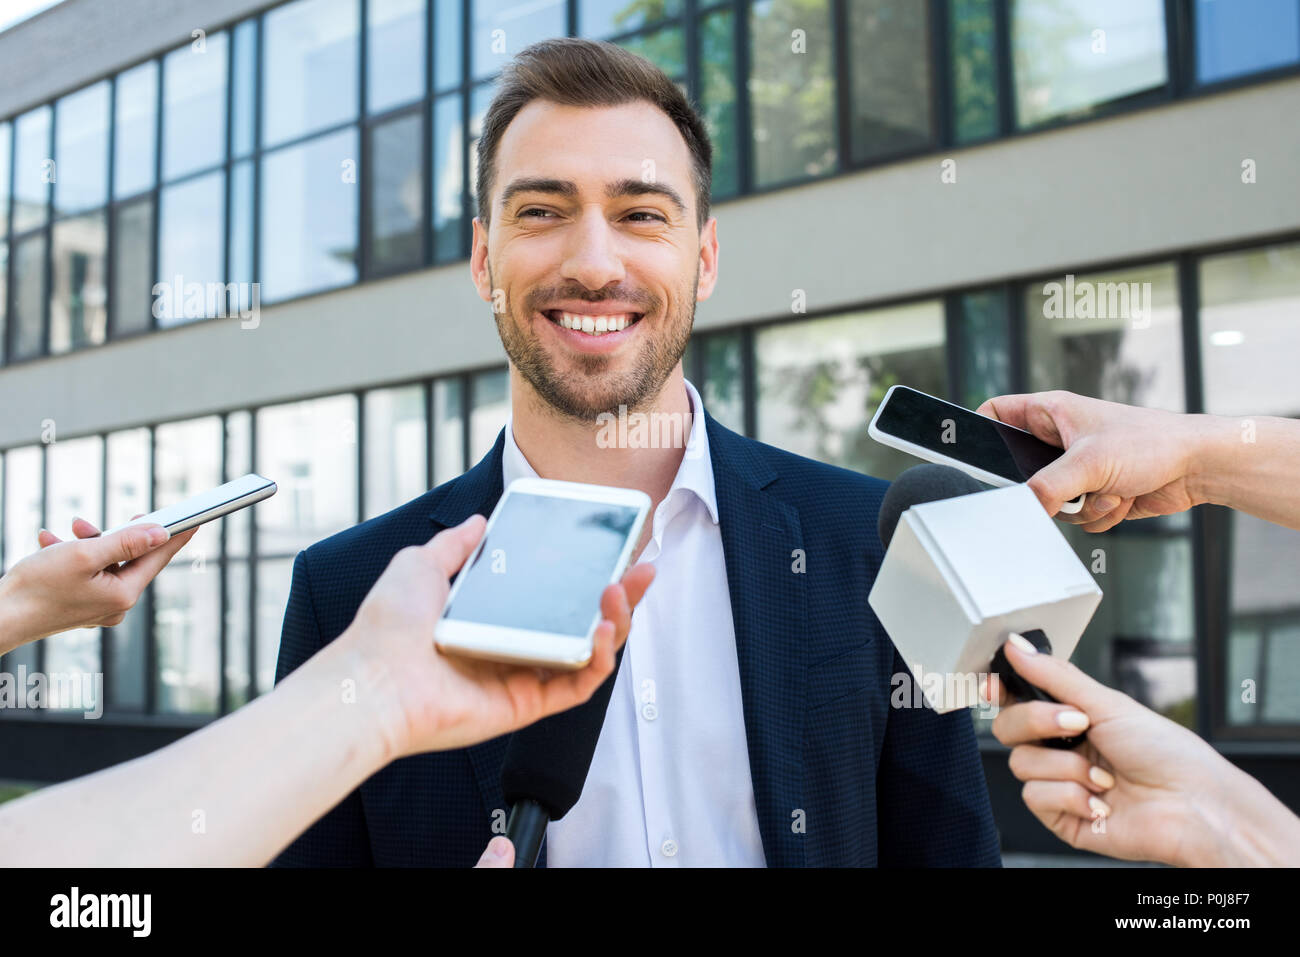 journalists interviewing smiling successful businessman with microphones and smartphones Stock Photo